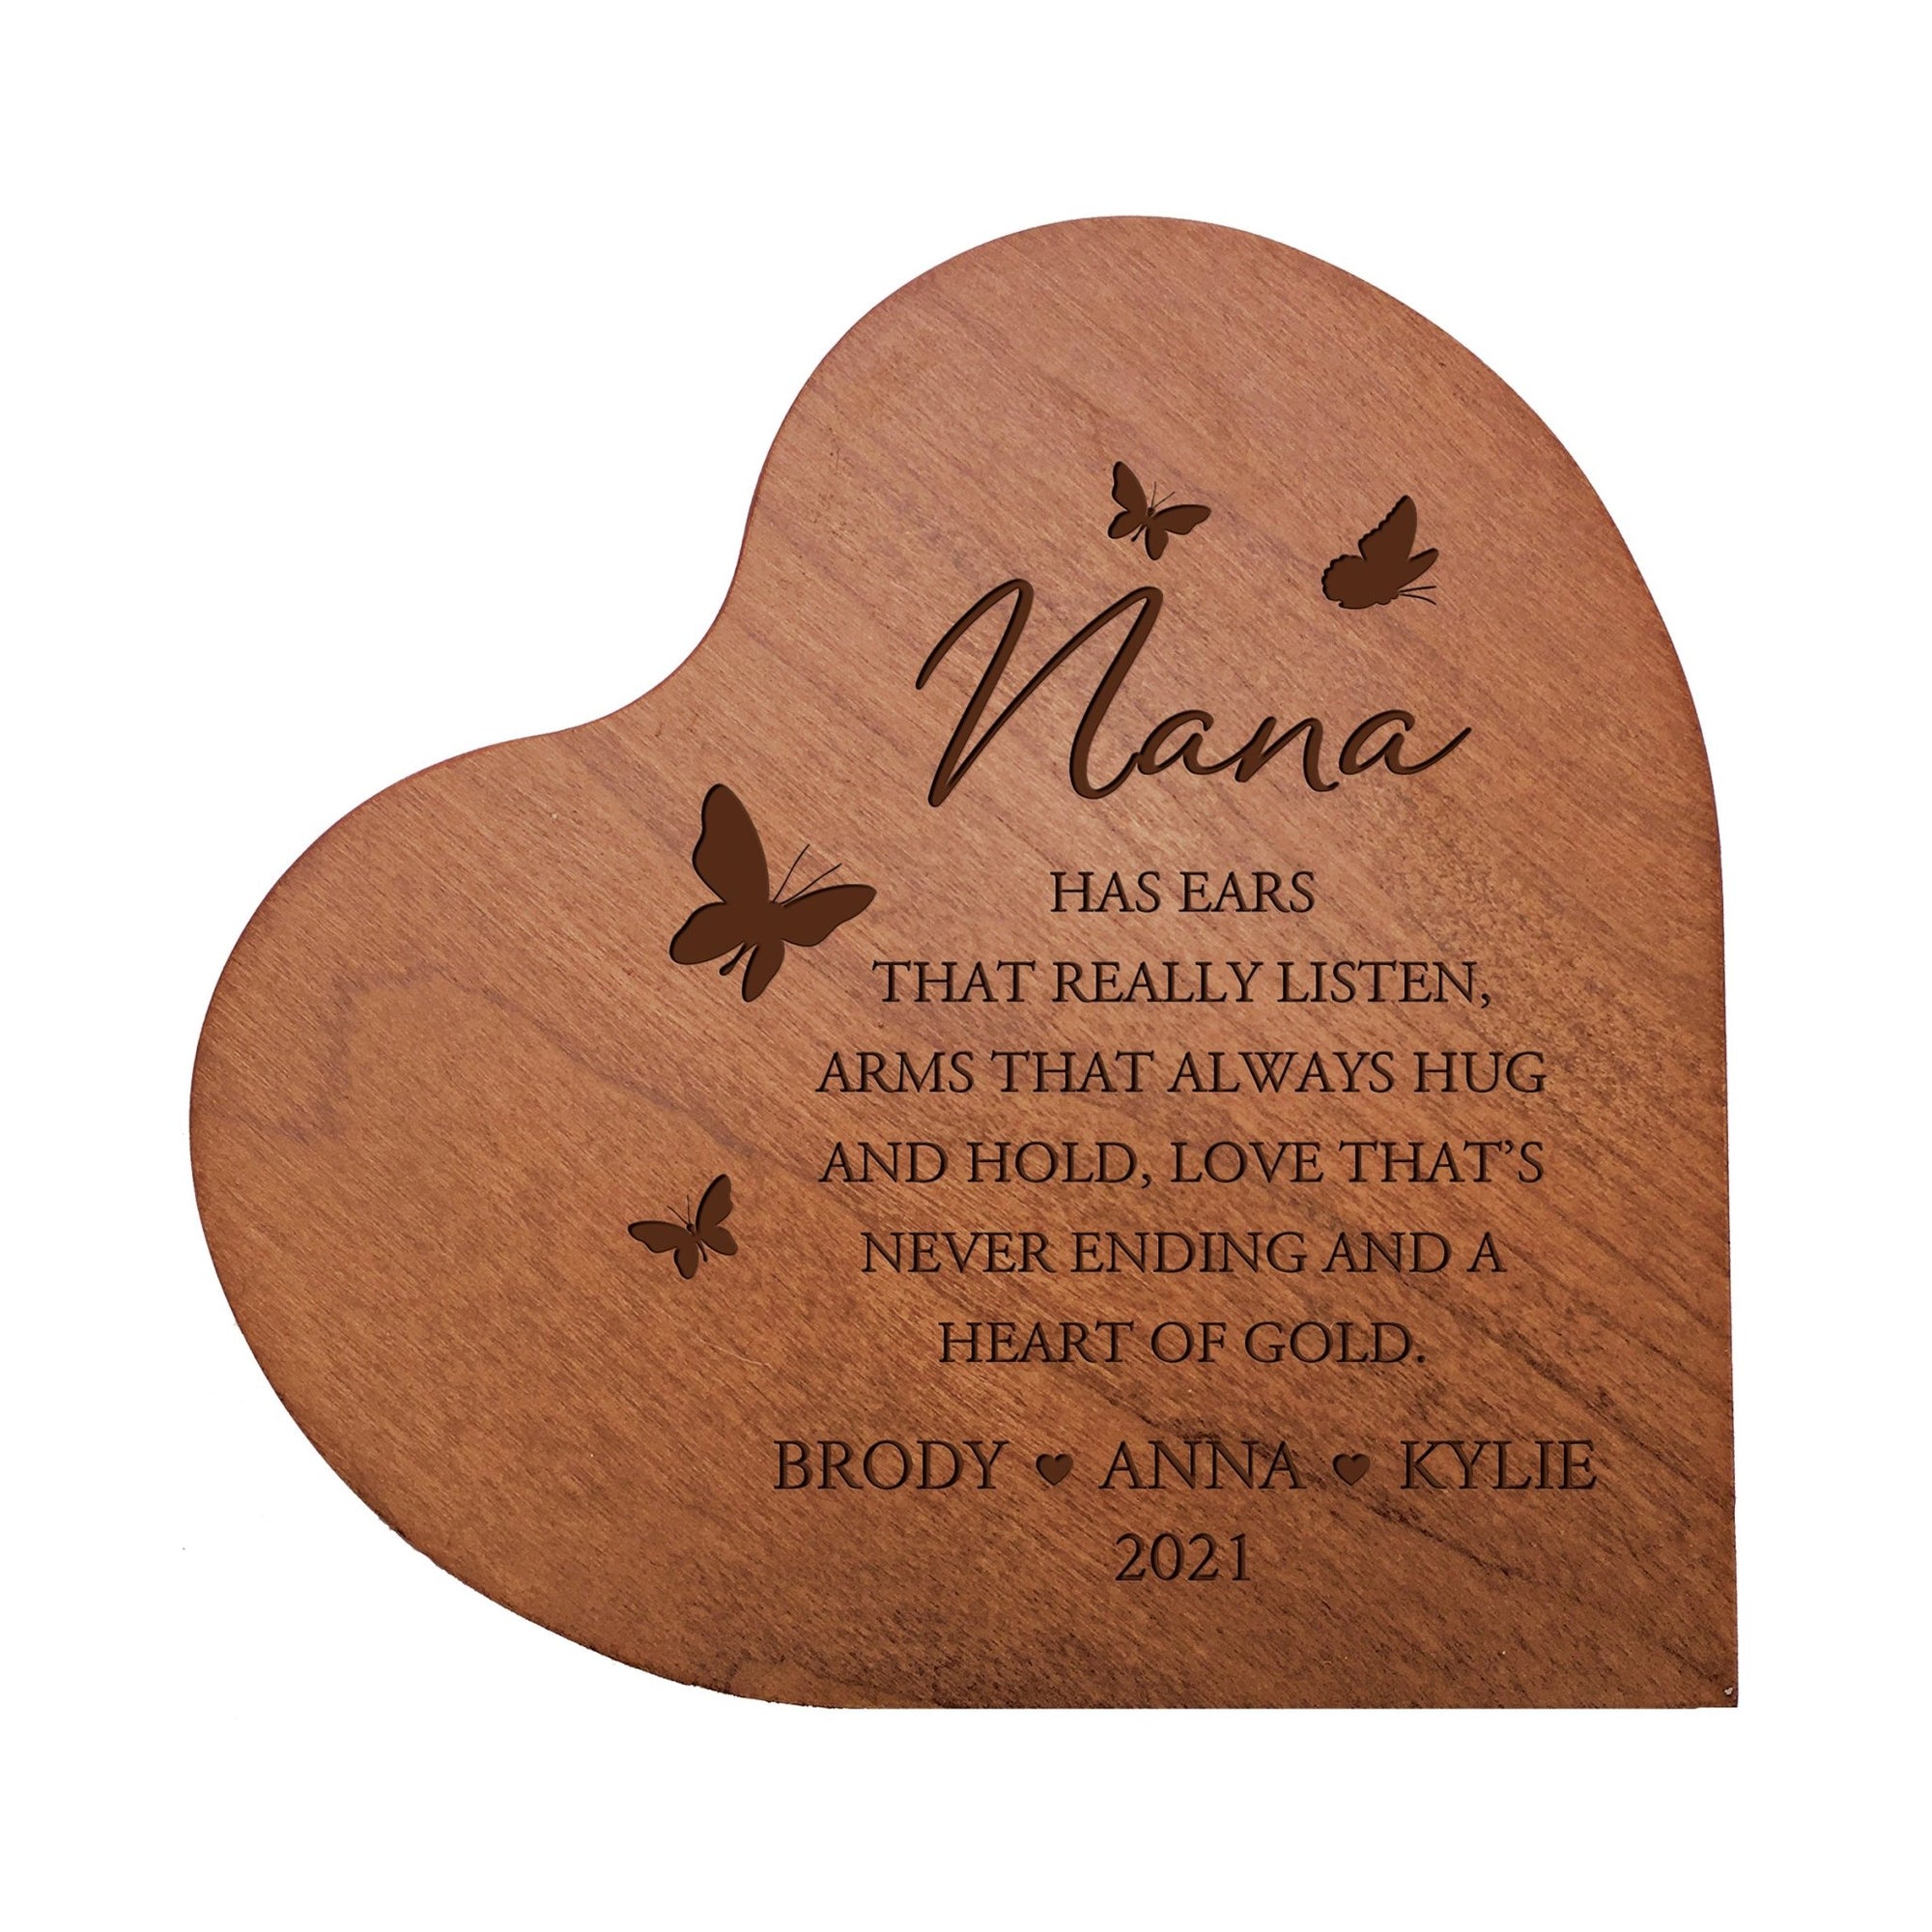 Personalized Modern Nana’s Love Solid Wood Heart Decoration With Inspirational Verse Keepsake Gift 5x5.25 - Nana Has Ears That Really = Heart Of Gold - LifeSong Milestones